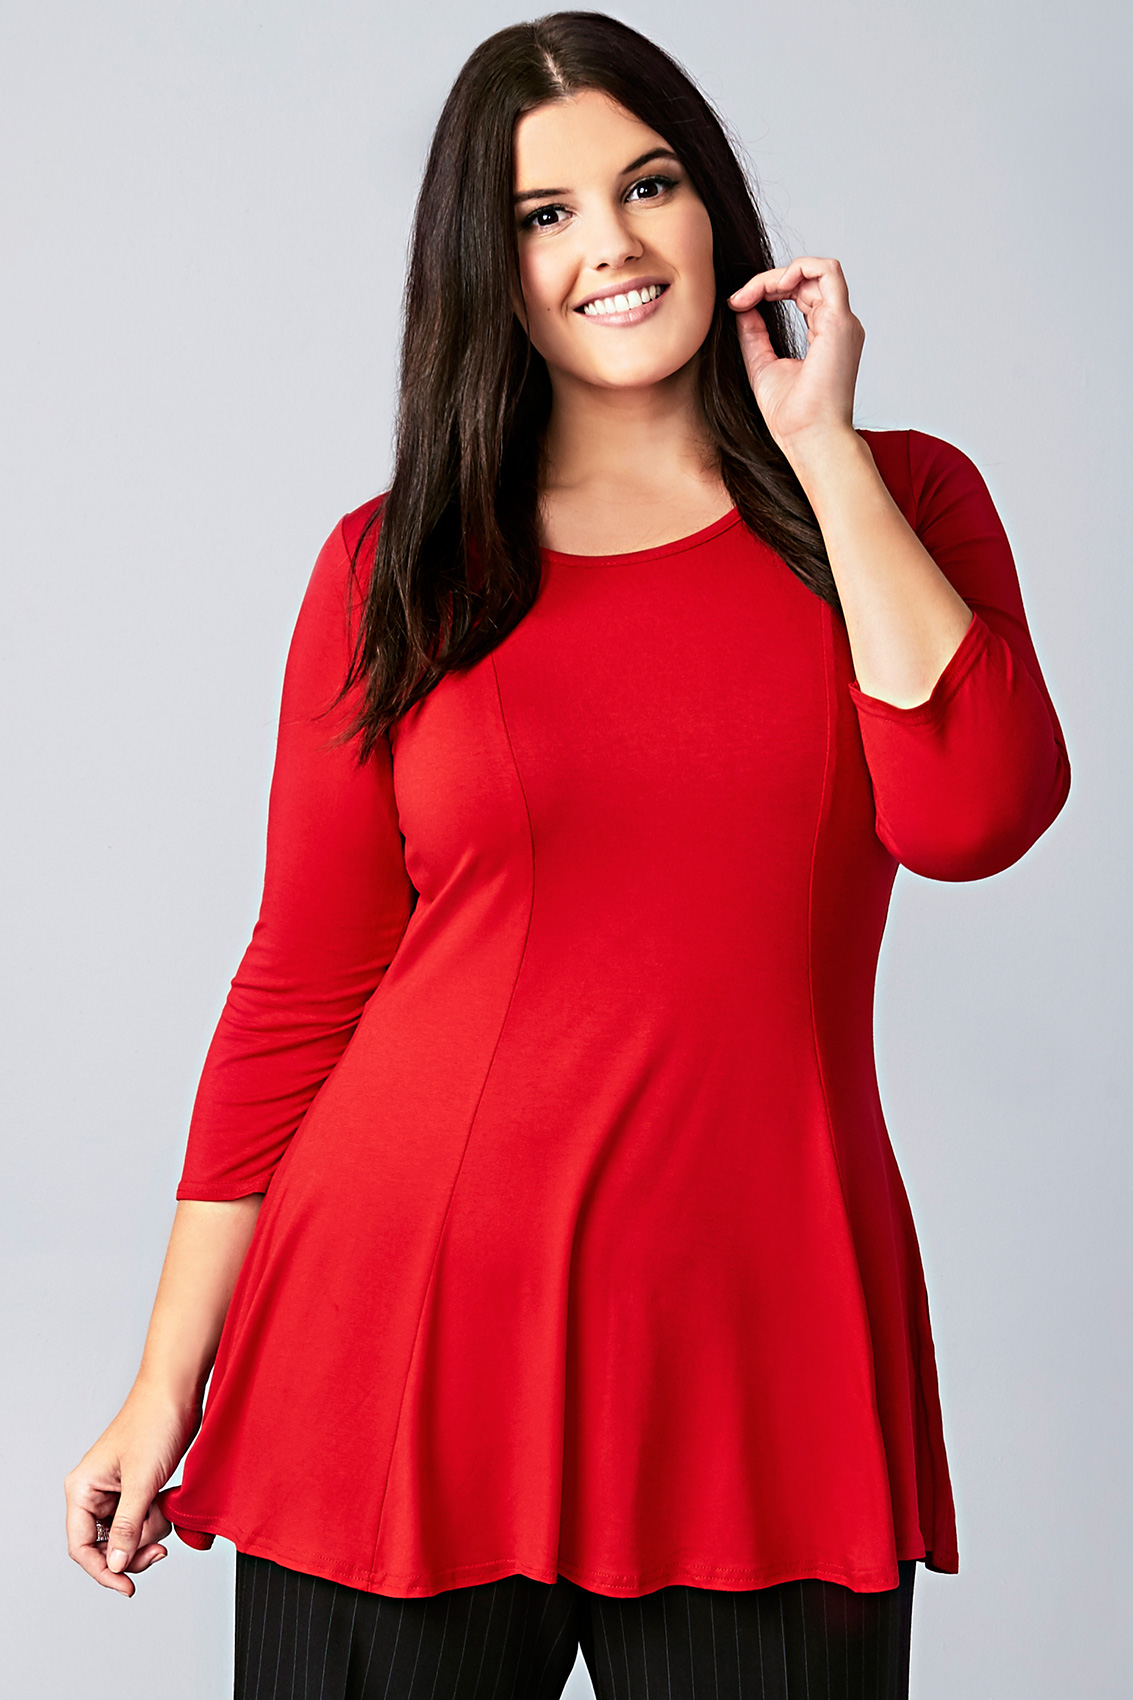 Red Panelled Peplum Swing Top Plus Size 16 to 36